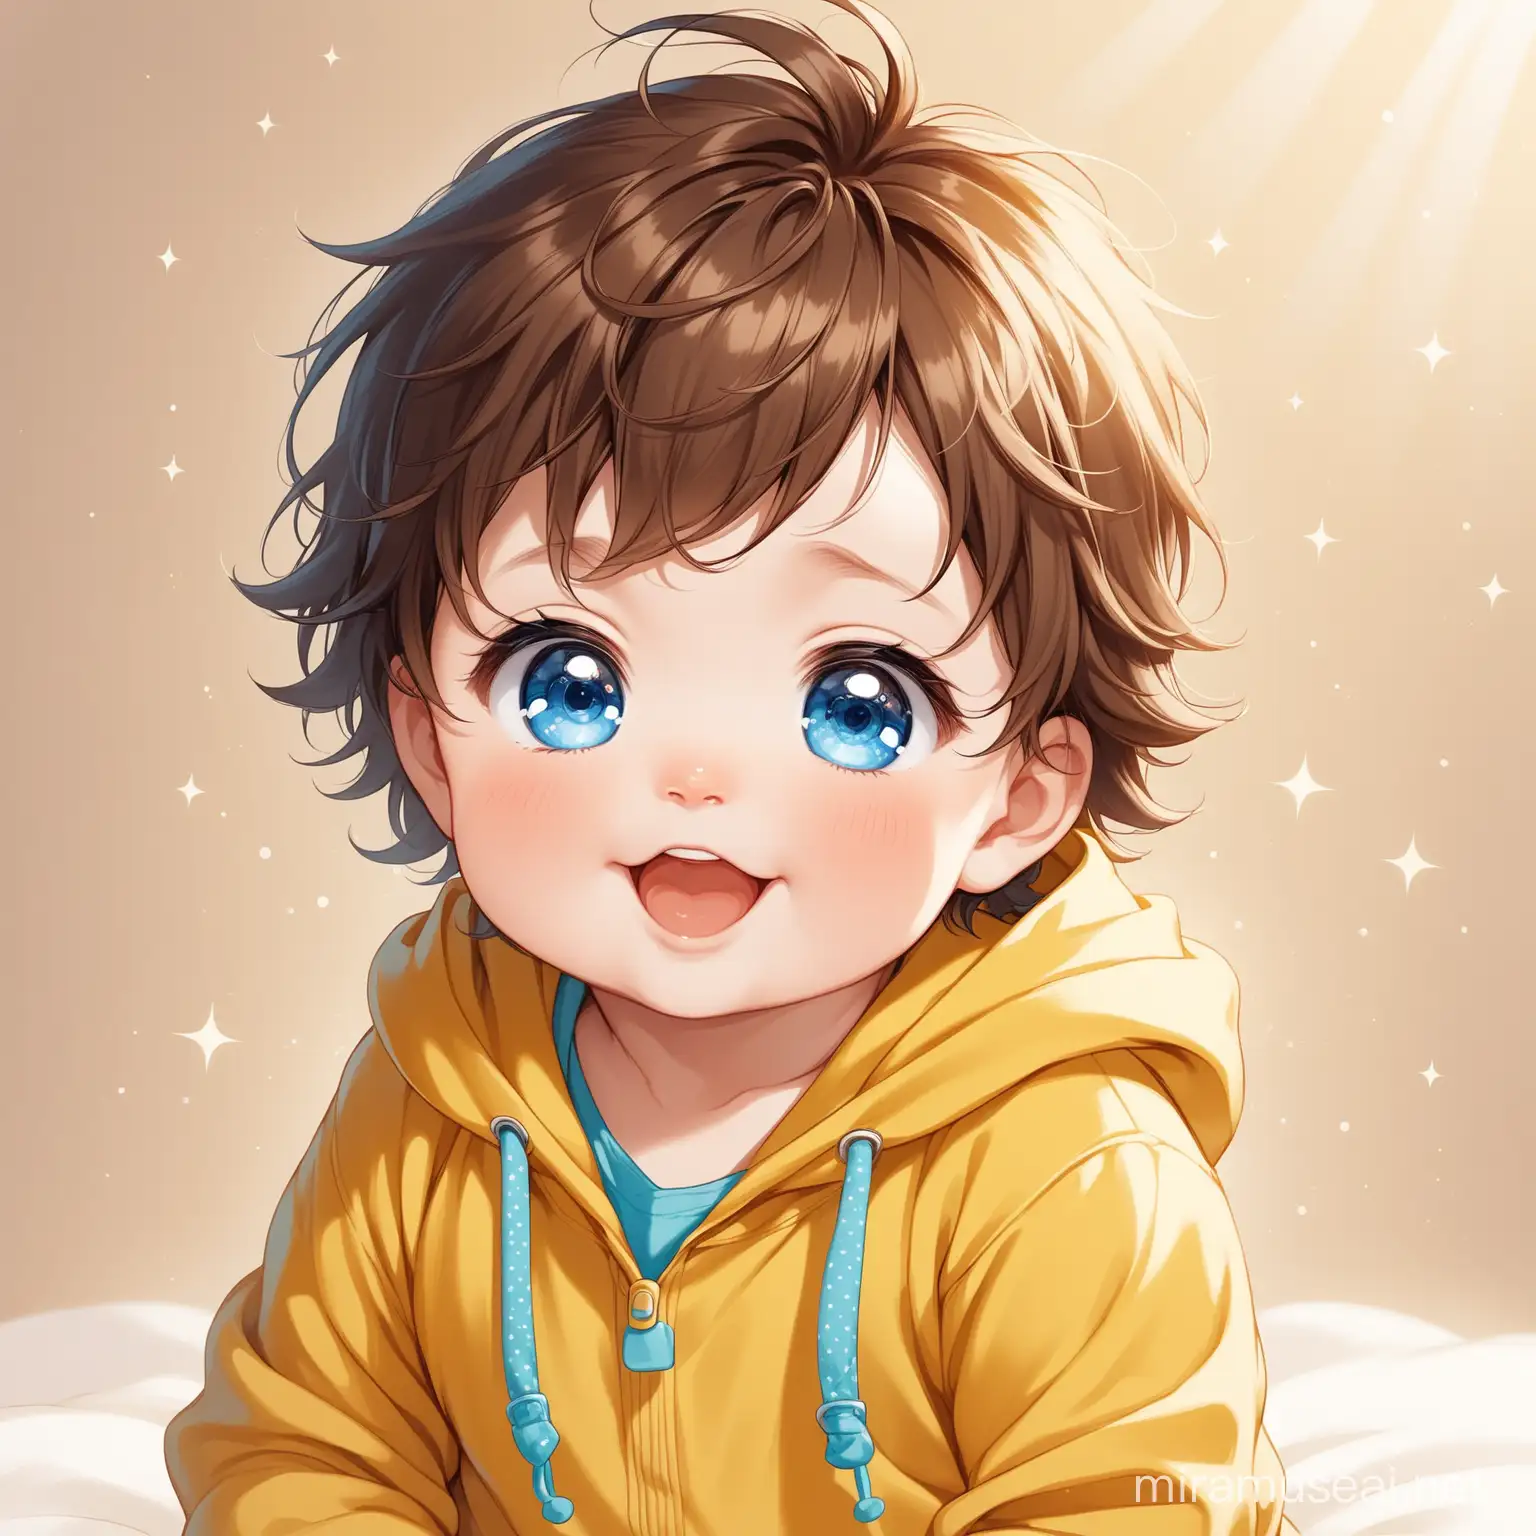 Cute and happy baby boy with blue eyes, messy brown hair wearing a yellow hoodie.